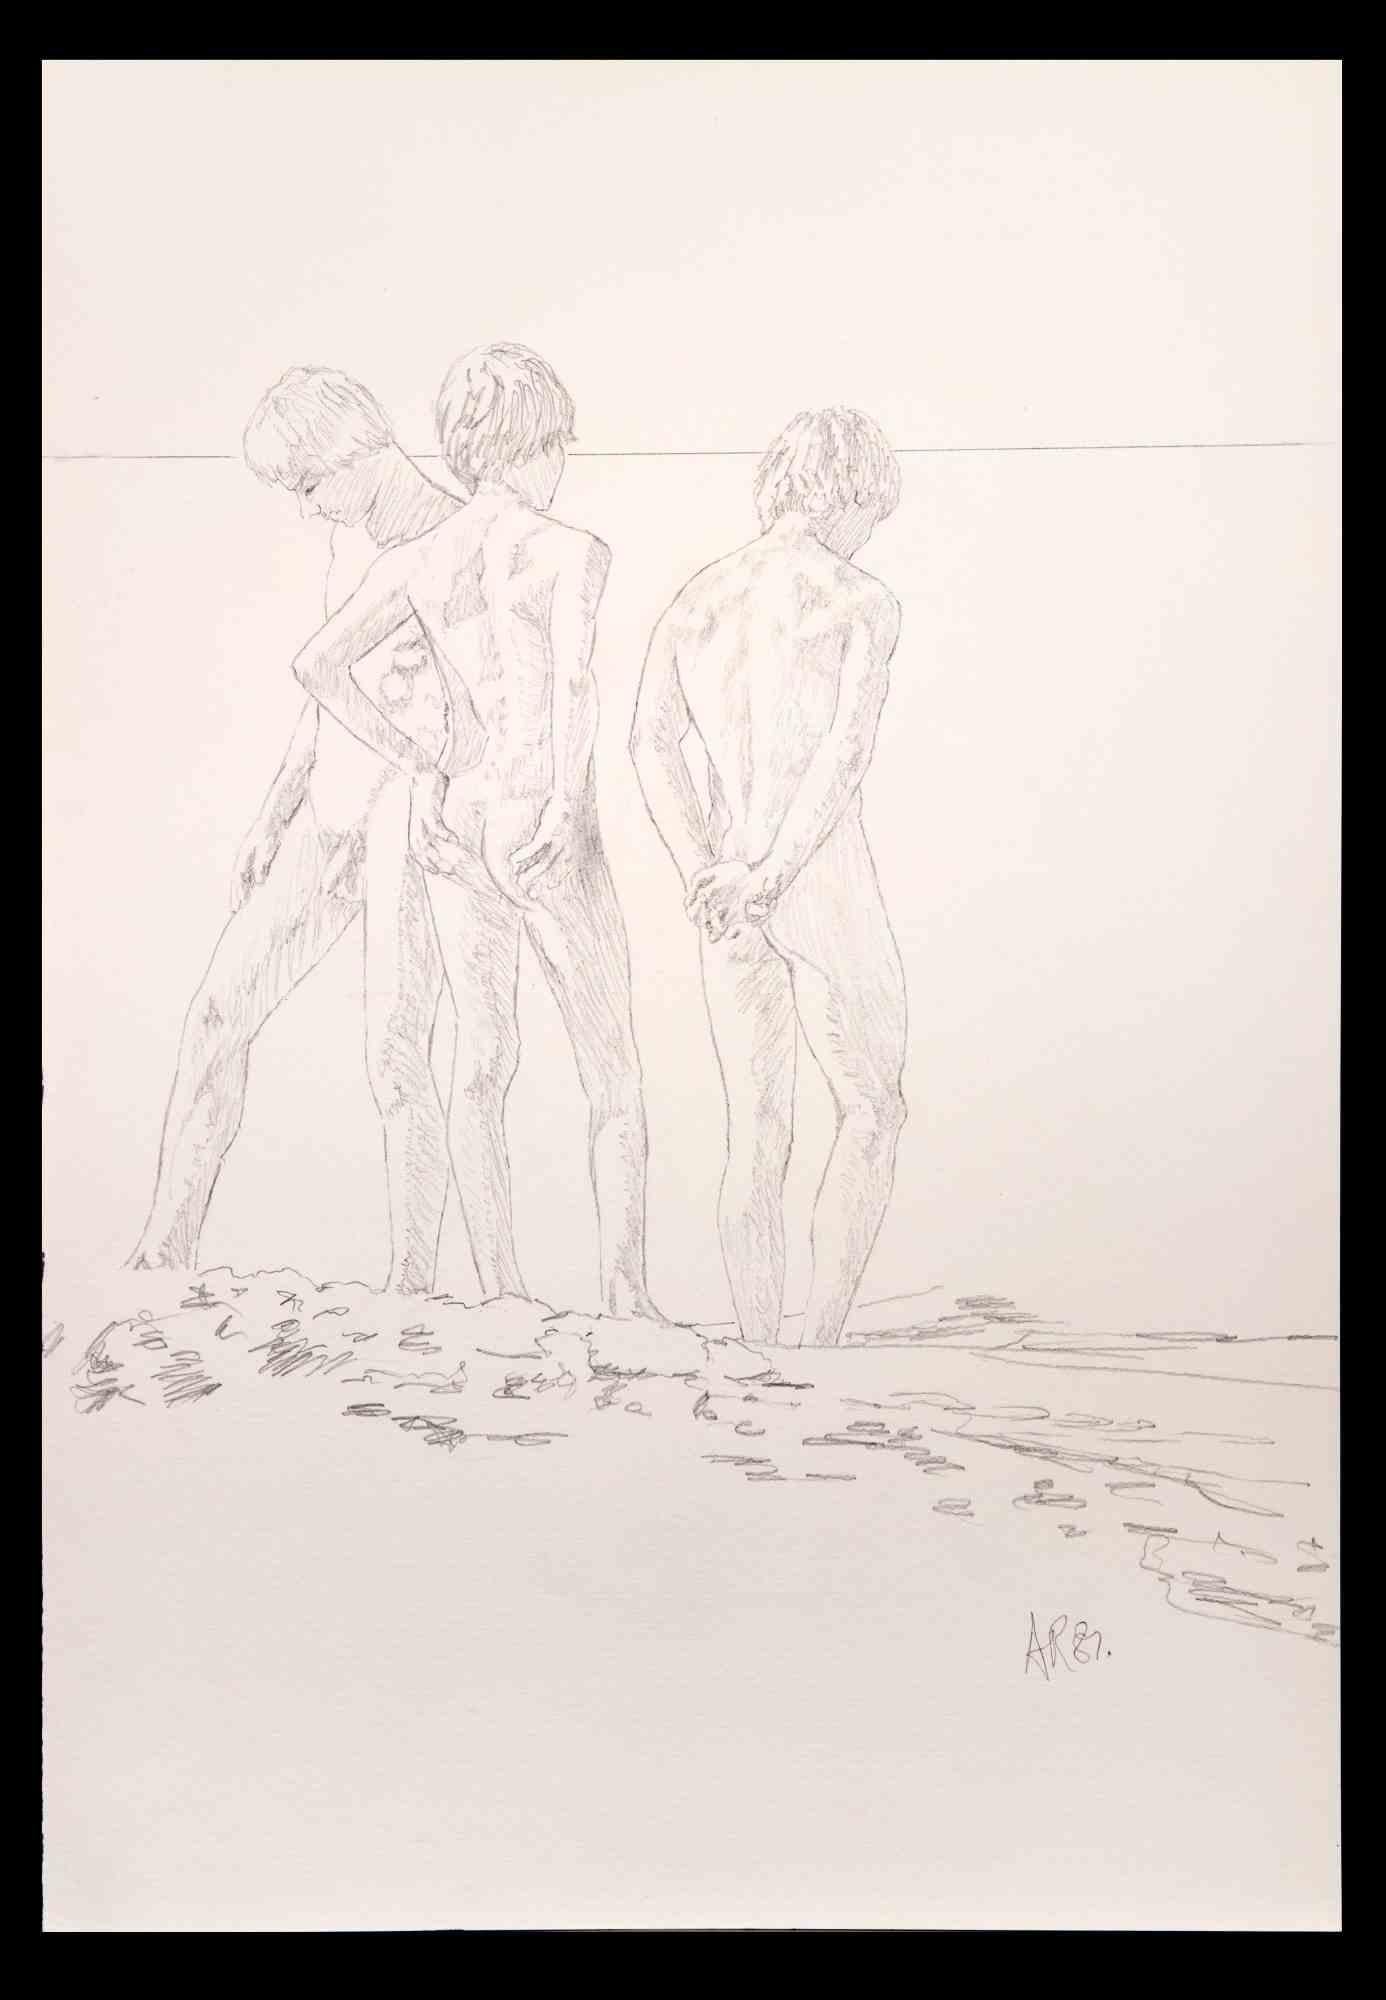  Teens at the beach - Original Drawing by Anthony Roaland - 1982